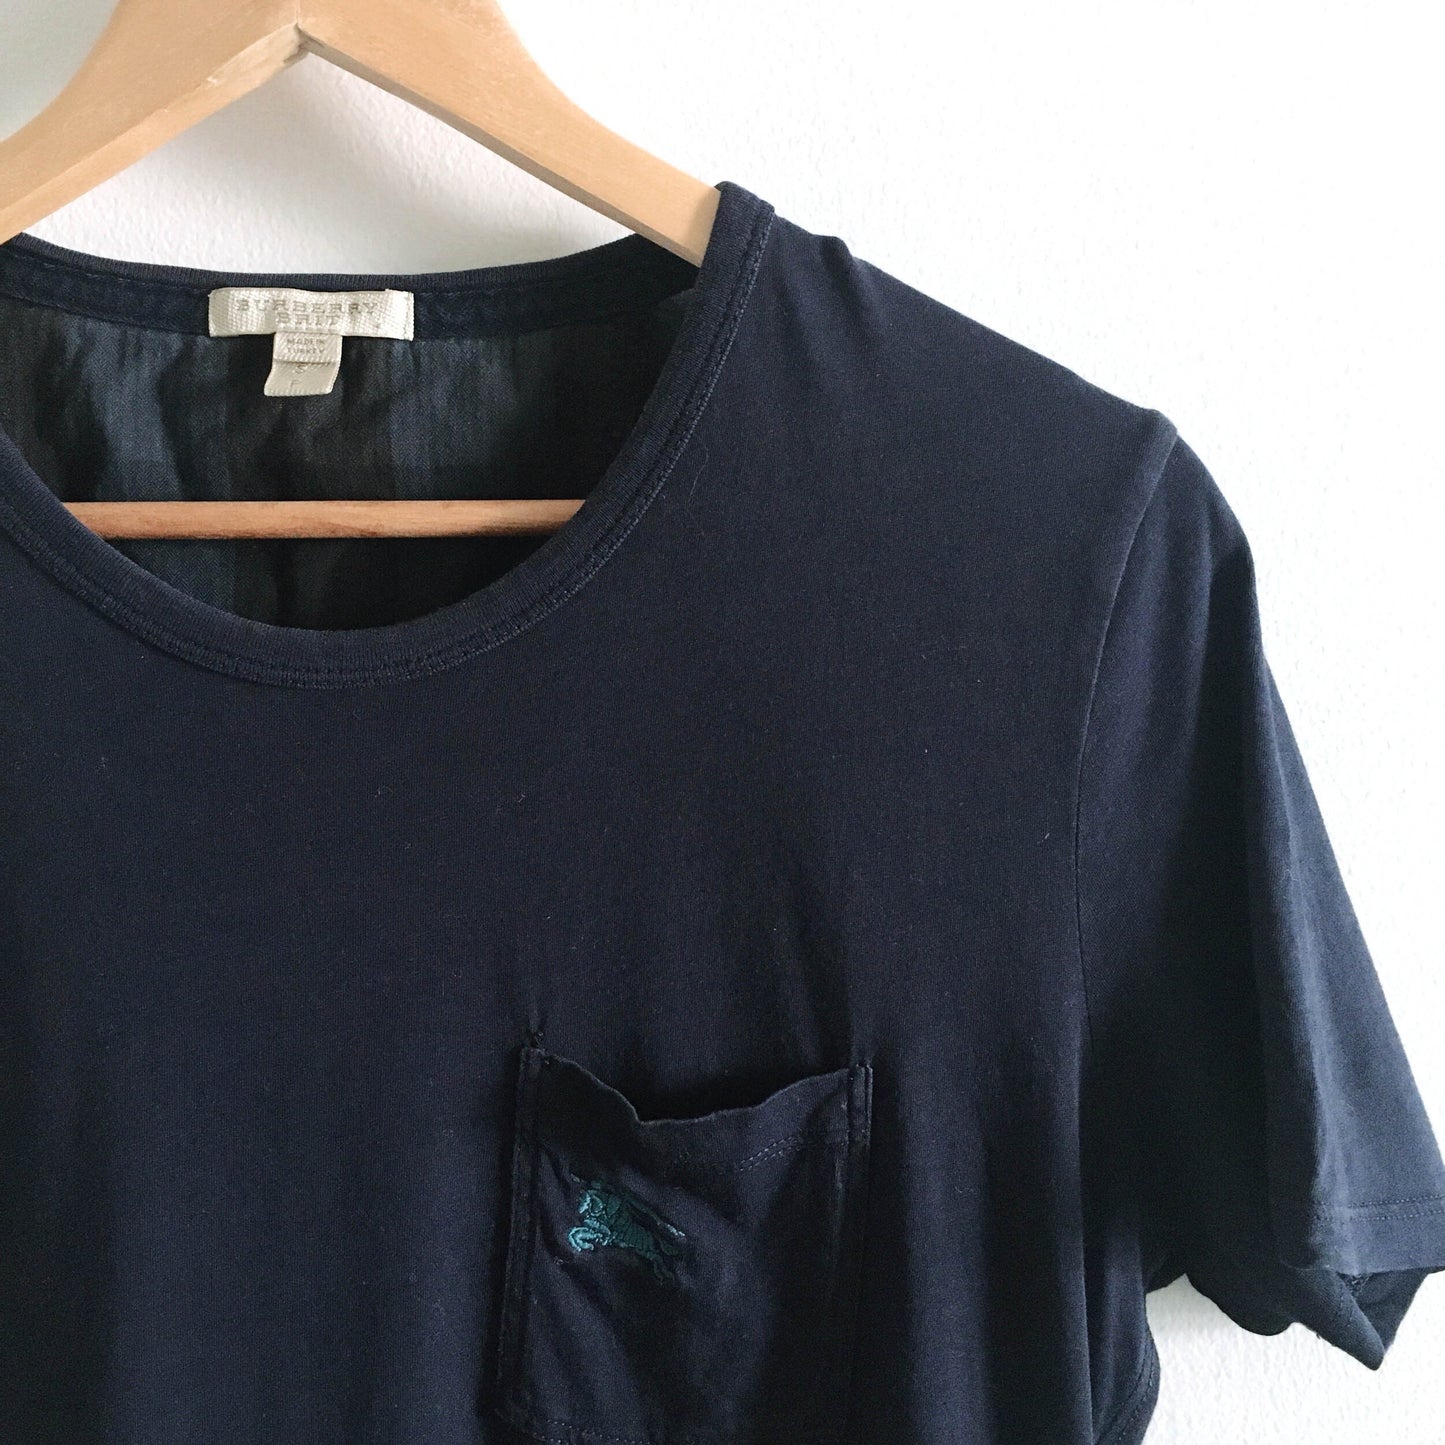 Burberry Brit embroidered pocket tee - size Small